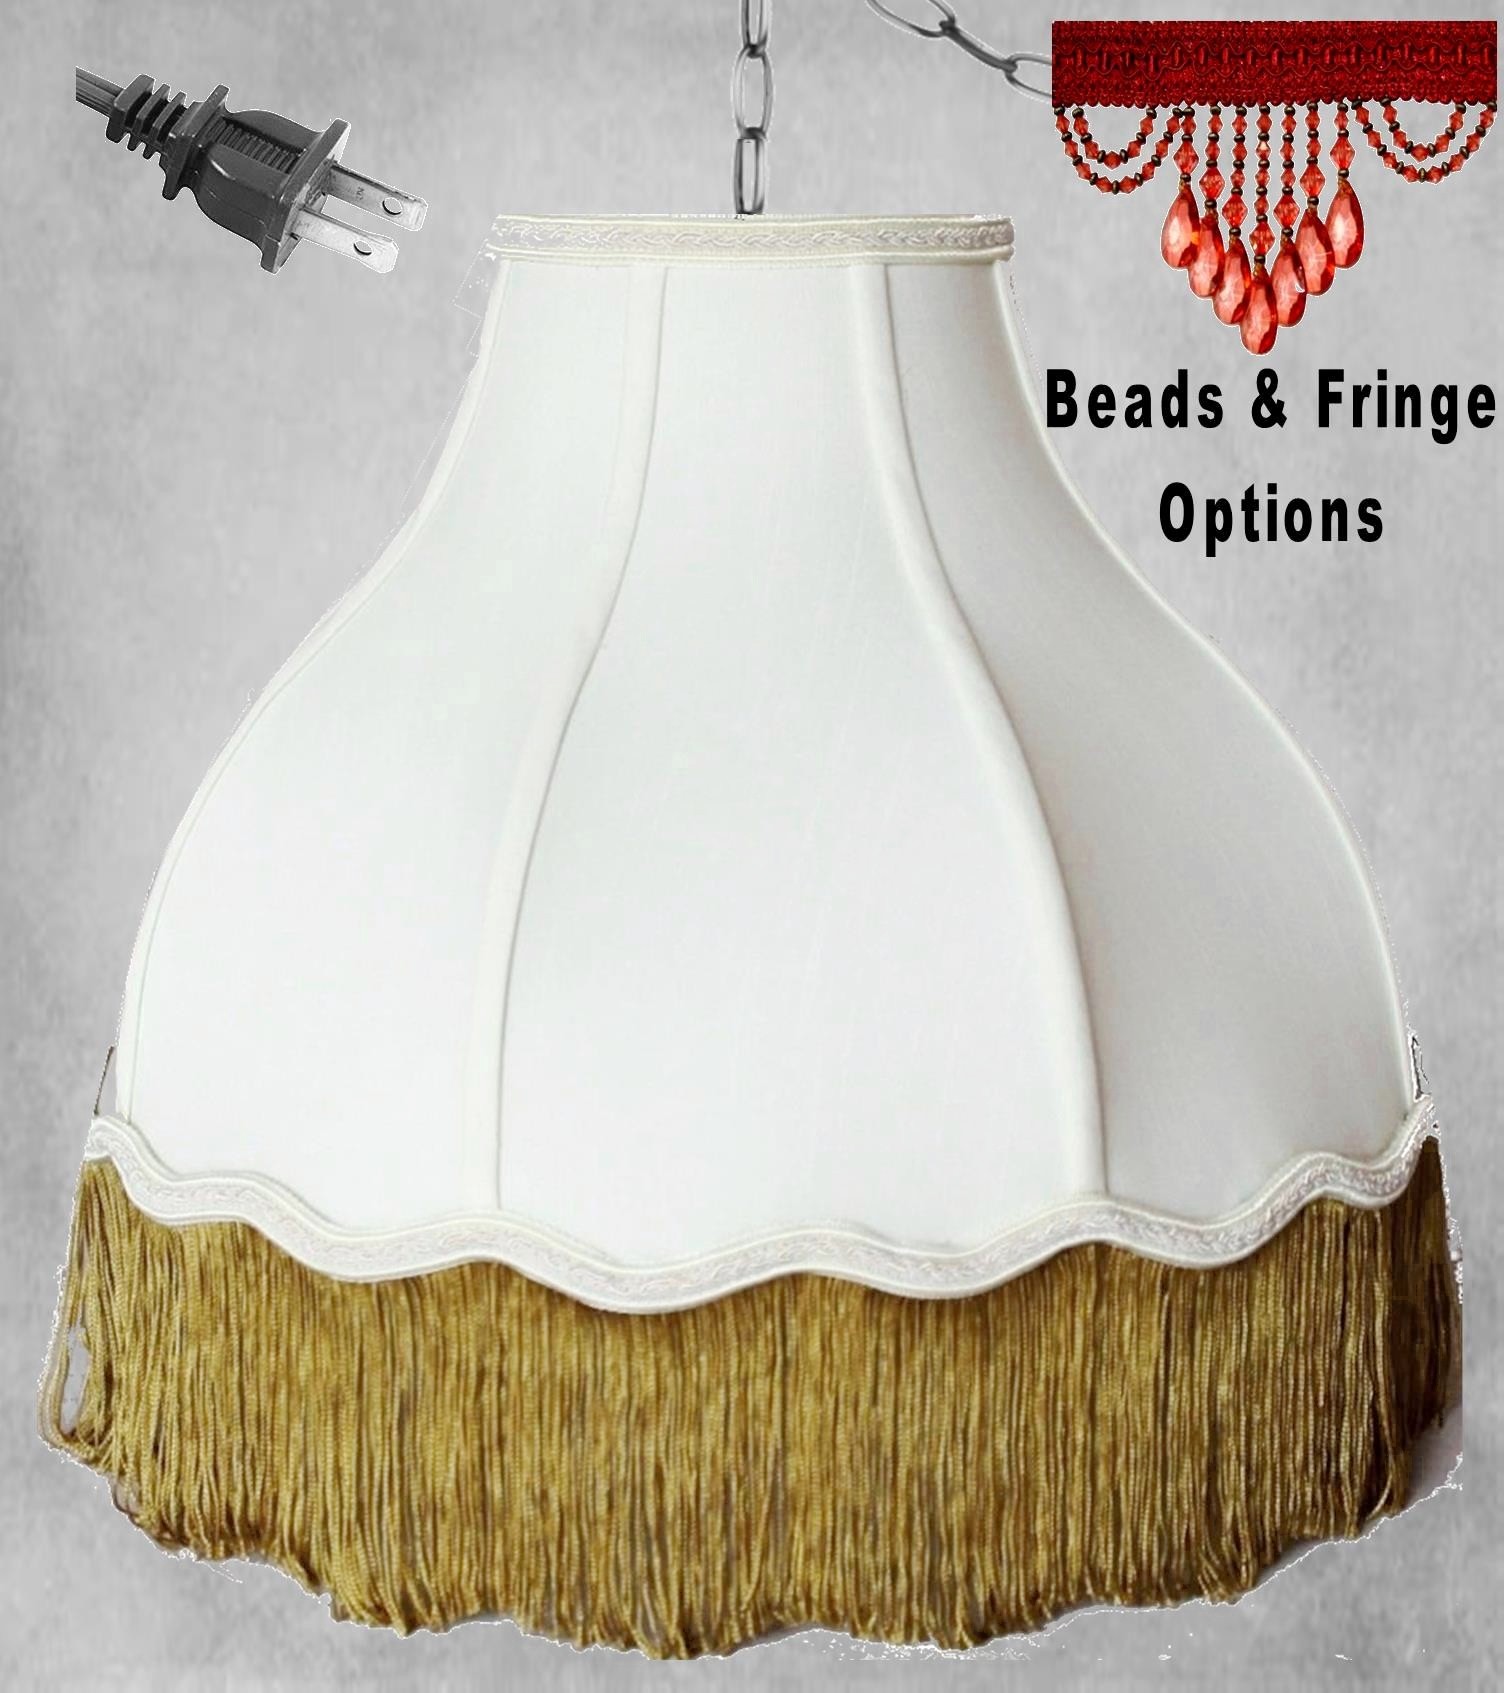 Victorian Swag Light with Beads or Fringe 16-18"W - Sale !